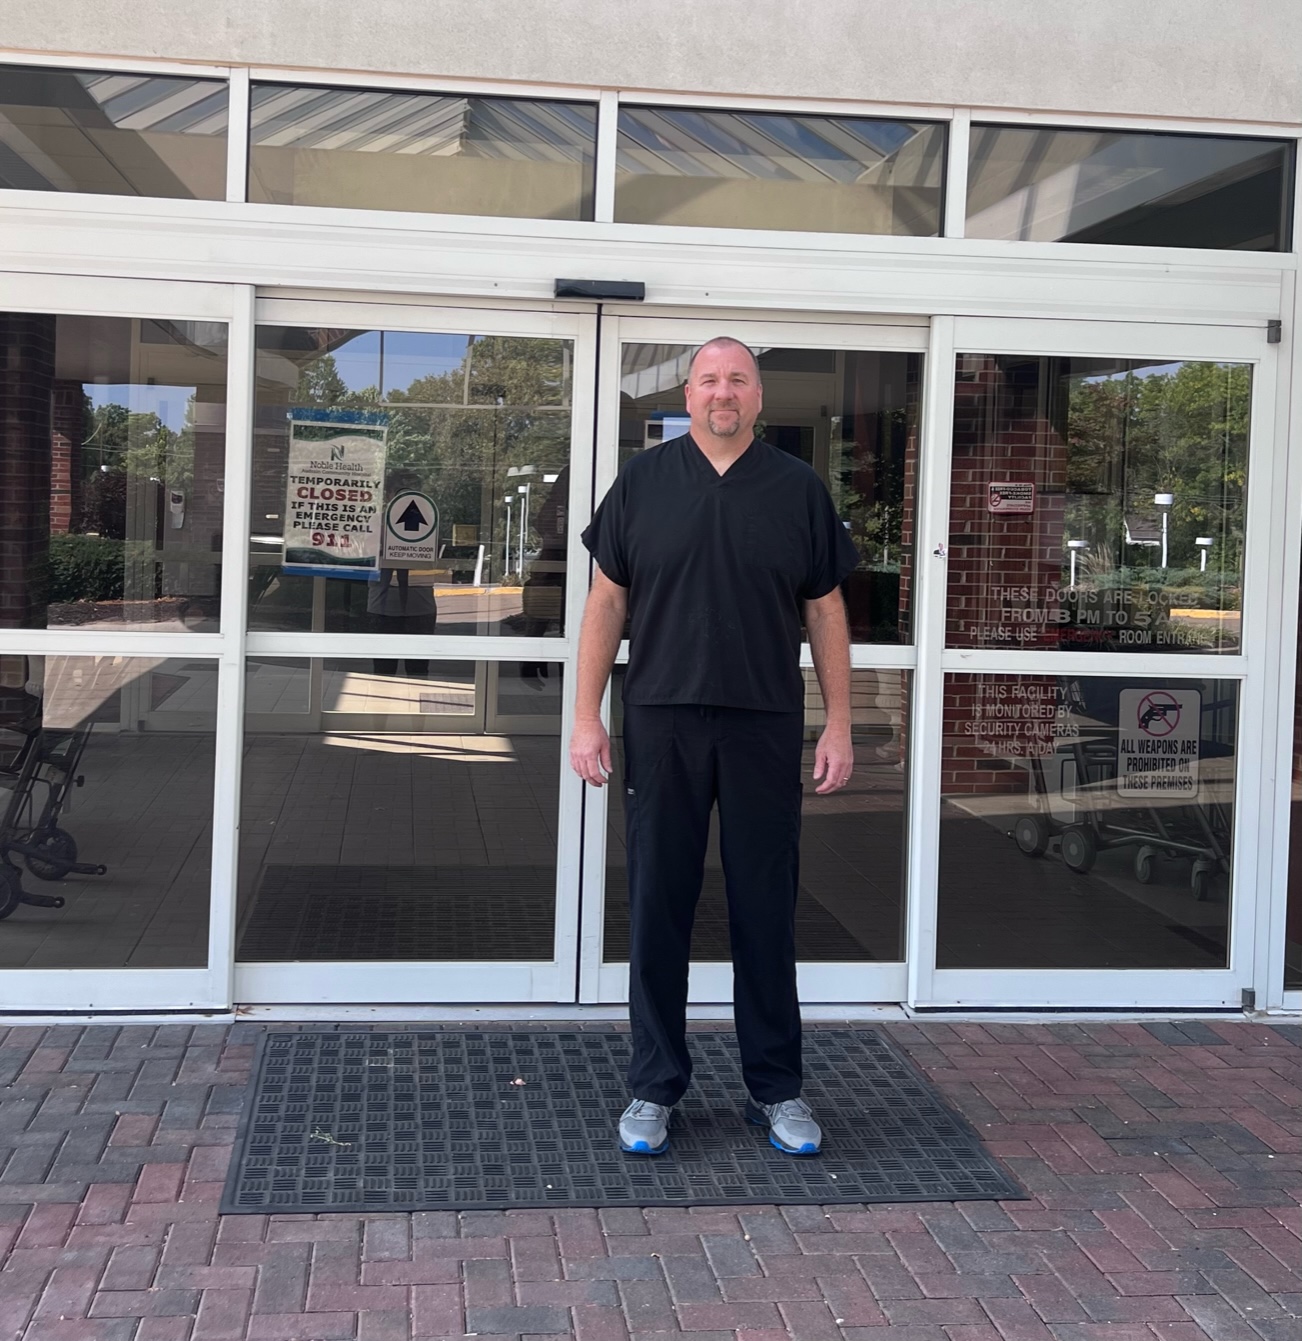 One photo shows Paul Human standing in front of the closed doors of Audrey Community Hospital.